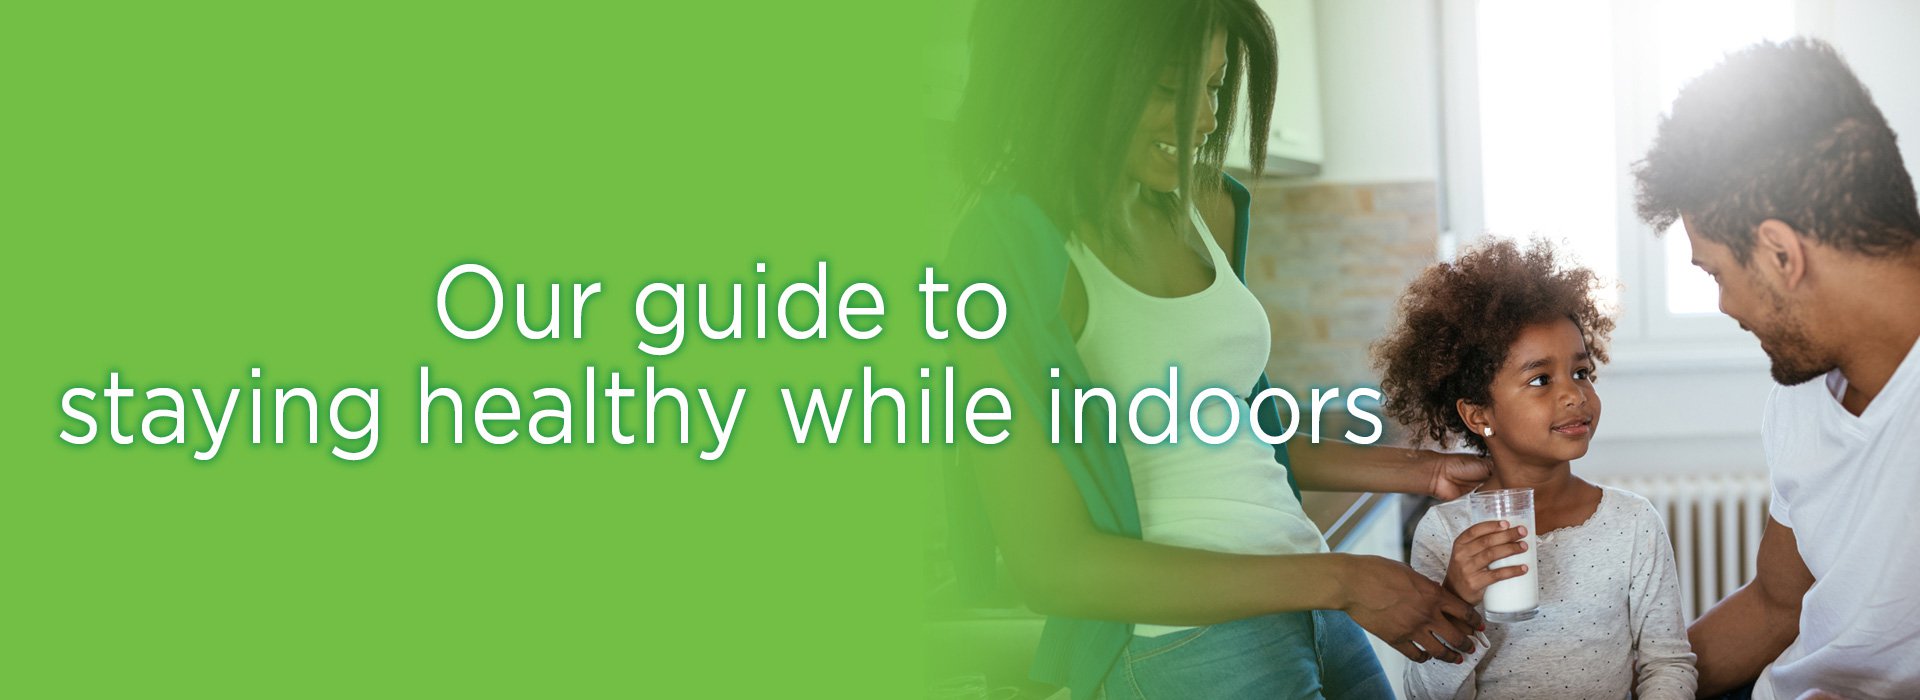 New Image International:Our guide to staying healthy while indoors